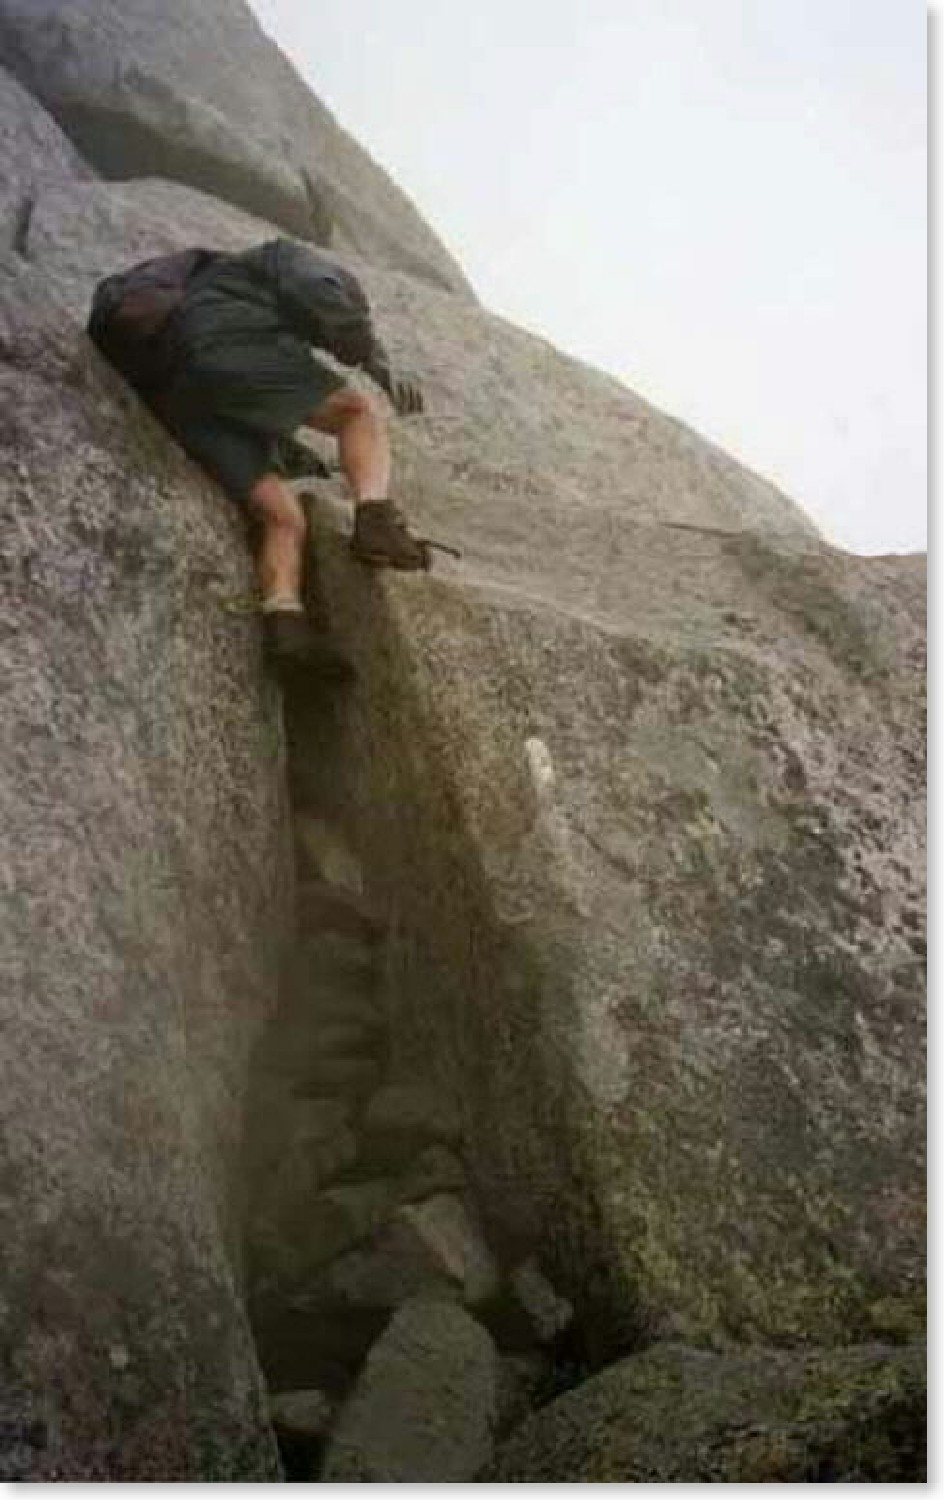 This is a precariously steep and tricky descending spot on the Hunt Trail (AT) as it comes down off Mt. Katahdin. Sept. 3, 2002.  Courtesy askus3@optonline.net